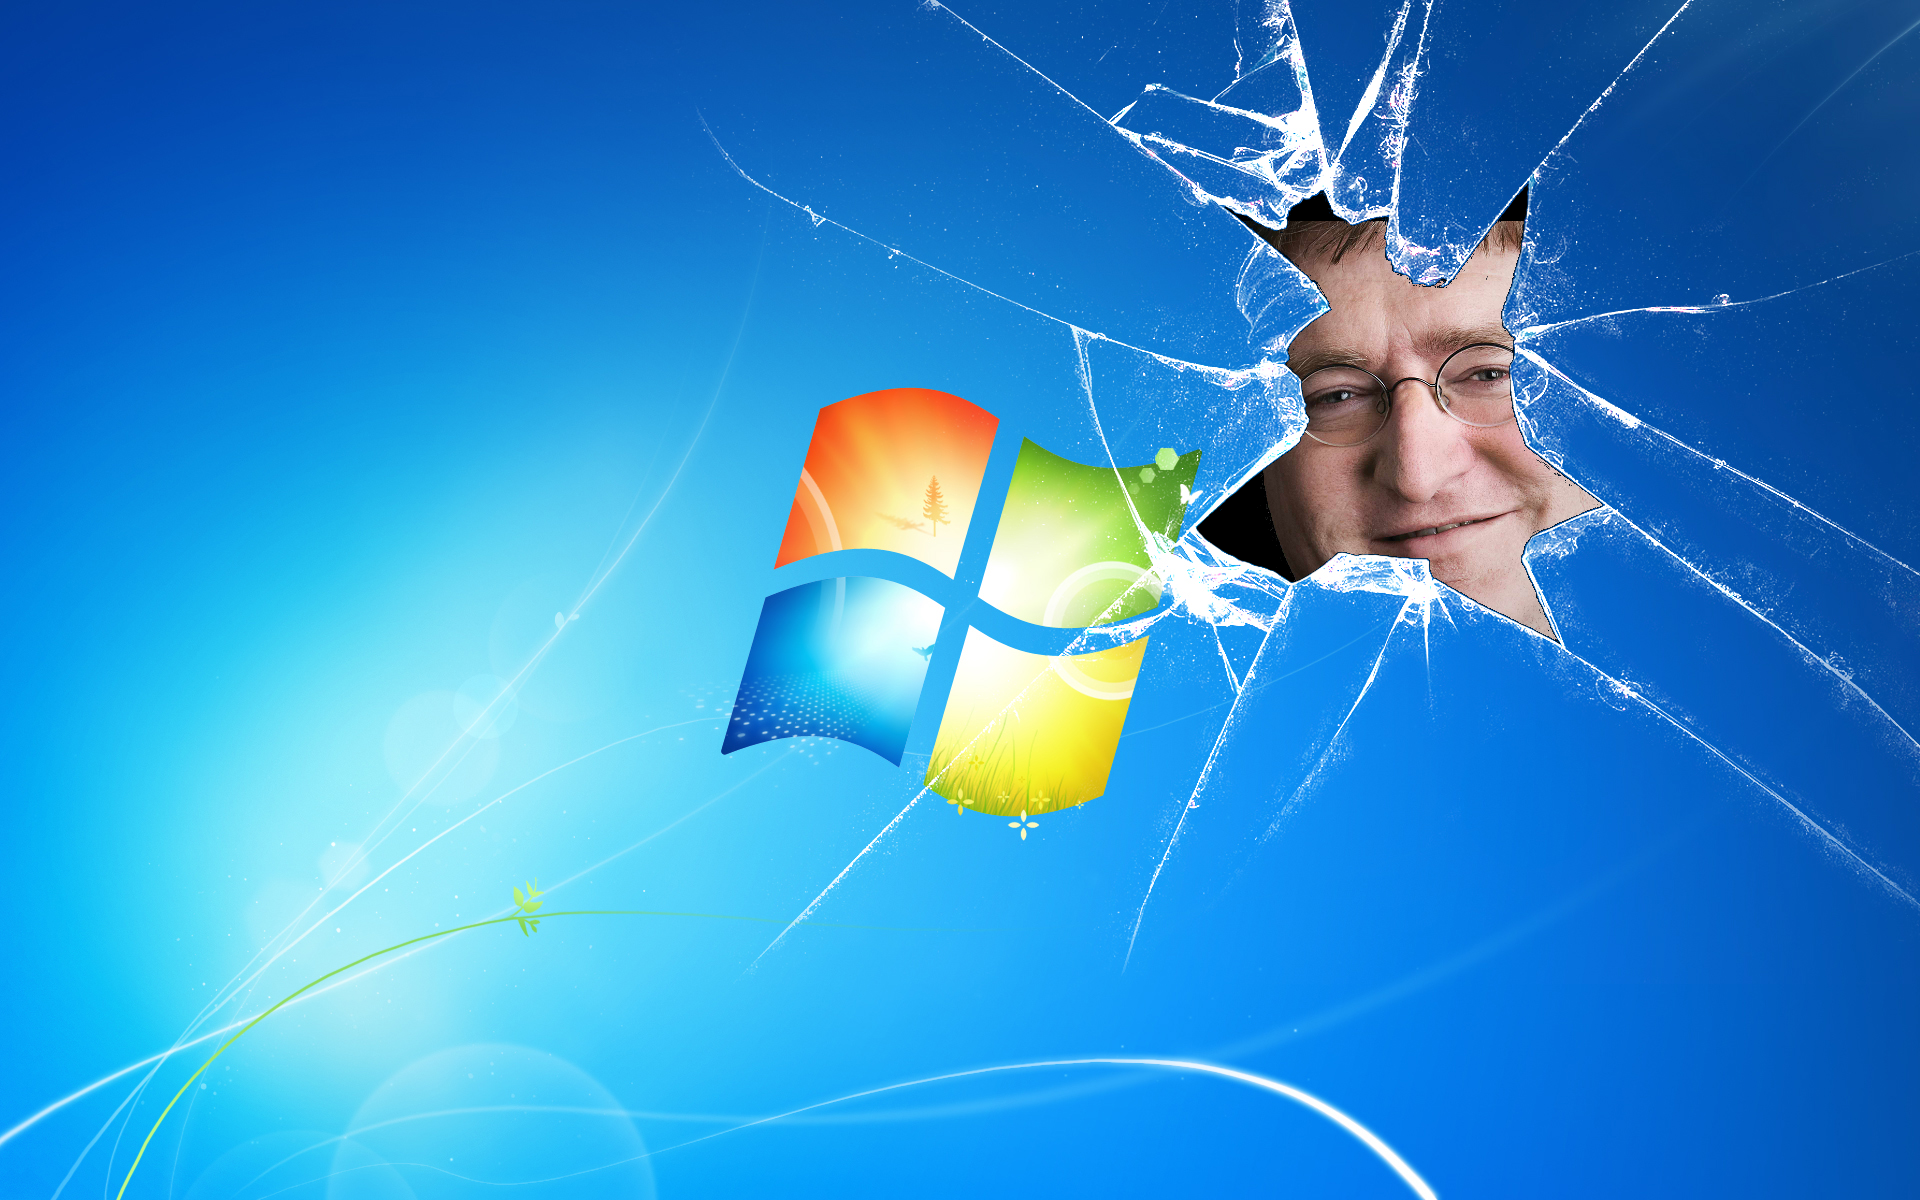 Gaben+windows+7+wallpaper+well+i+saw+this+in+a_50a4e9_4638453.png